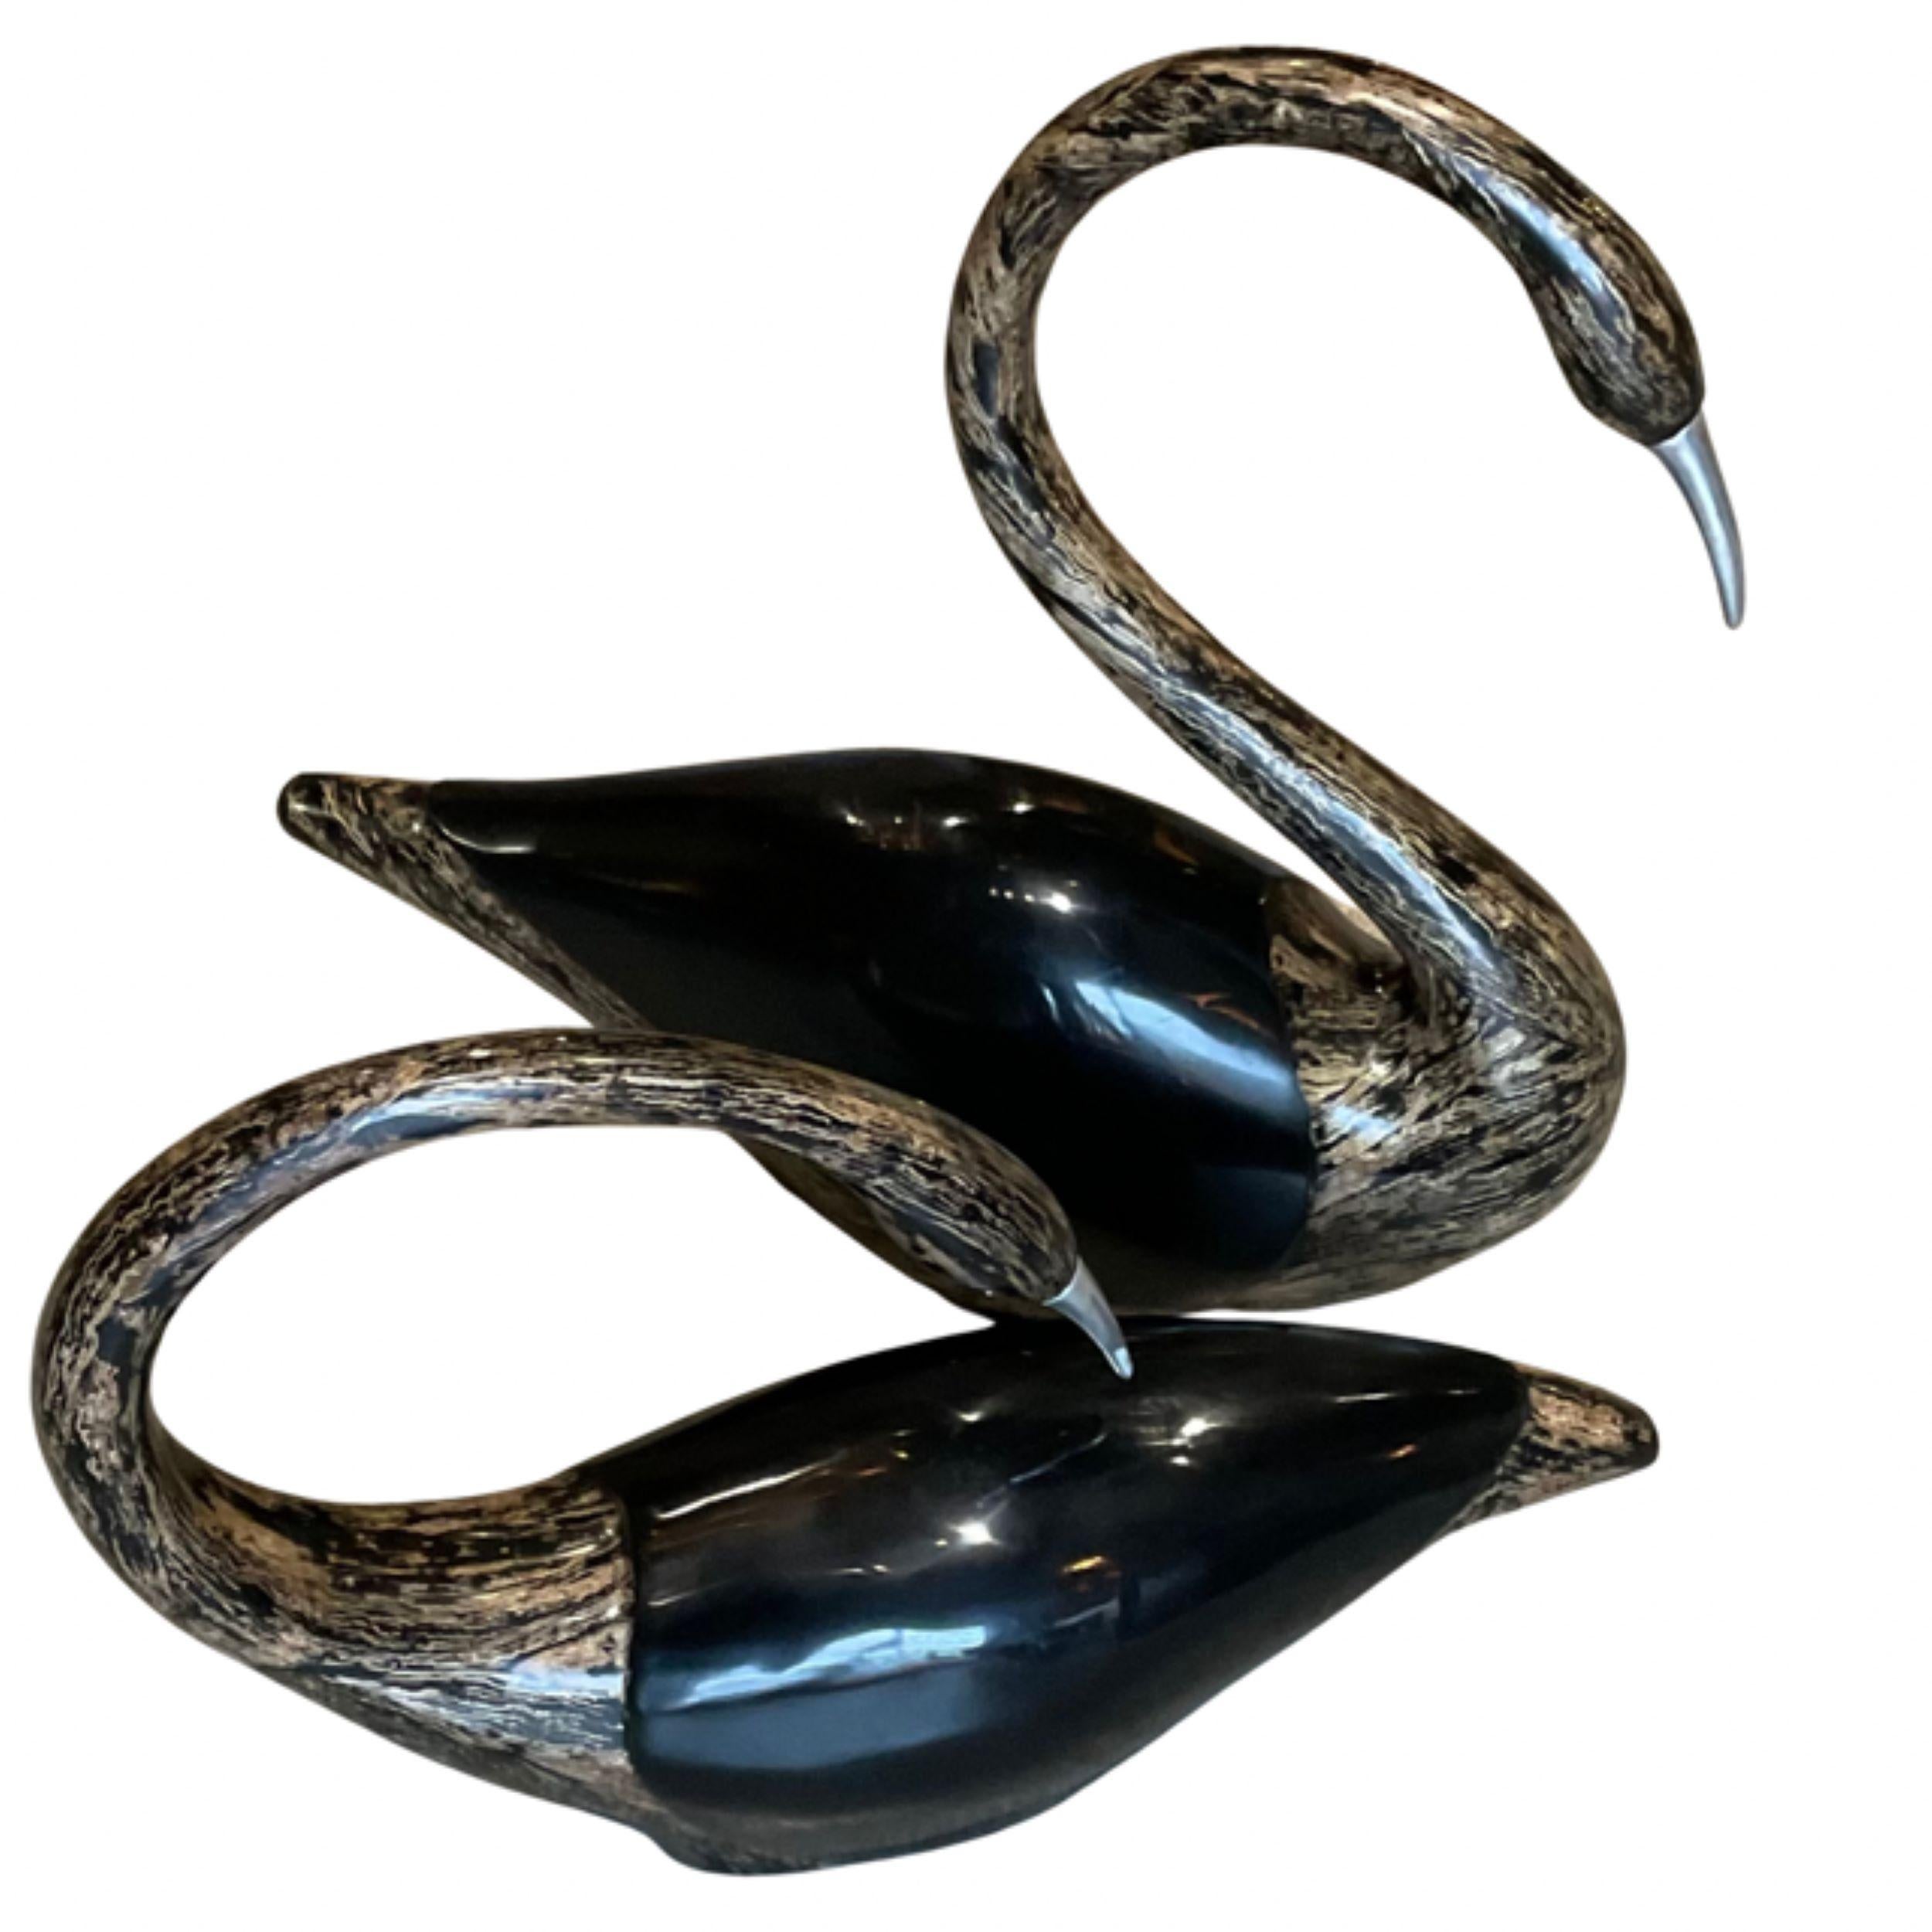 Marquis Collection of Beverly Hills
Pair of Unique Swan Sculptures
Featuring Aluminum Beaks
Black Lacquer body with tan & black Lacquer Accents
Both of the Swans have labels on the underside
Measures: Swan 1
 Height : 13.5’
 Width : 20’
